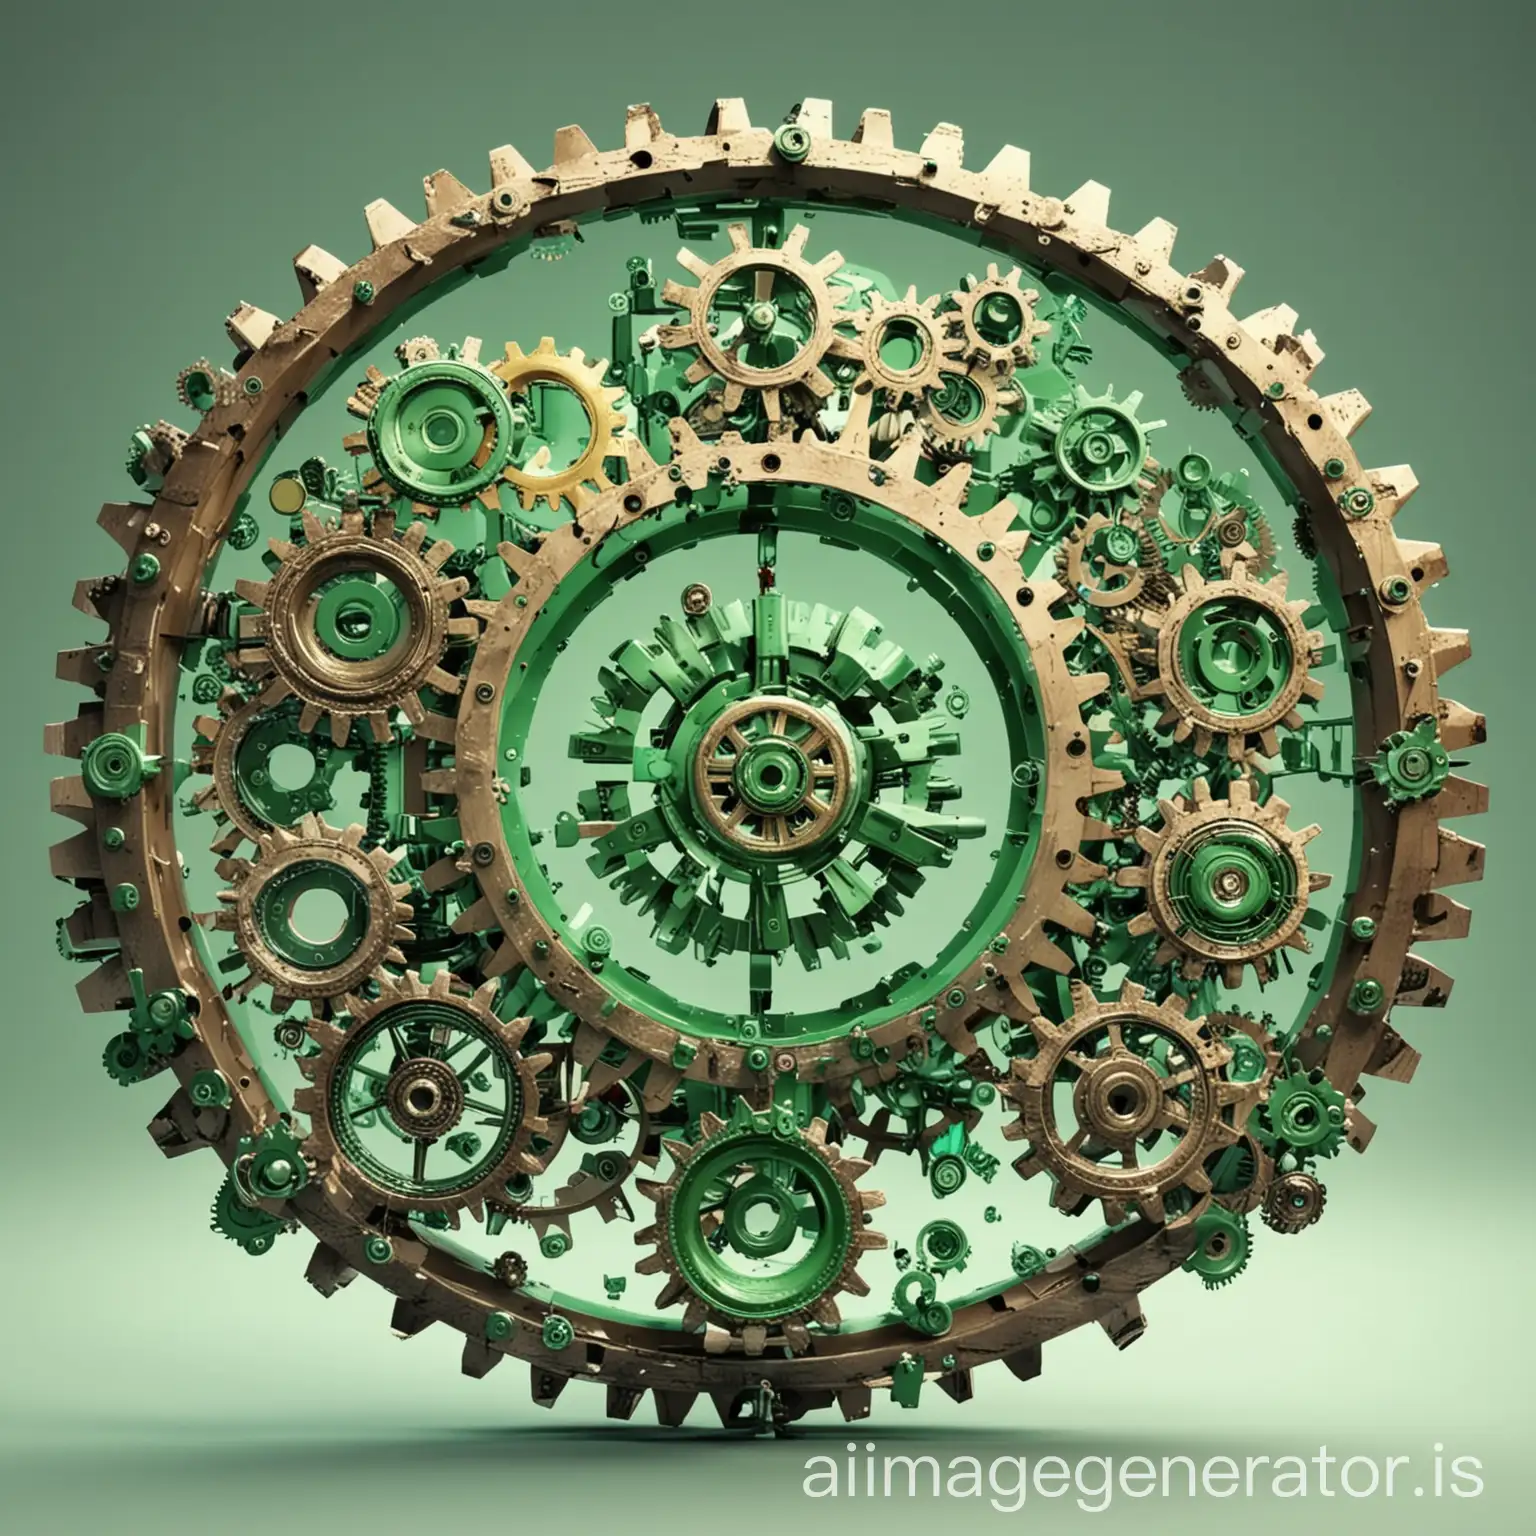 Dynamic-Cogs-Symbolizing-Economic-Growth-AI-Digitalization-Inequality-Reduction-and-Green-Technologies